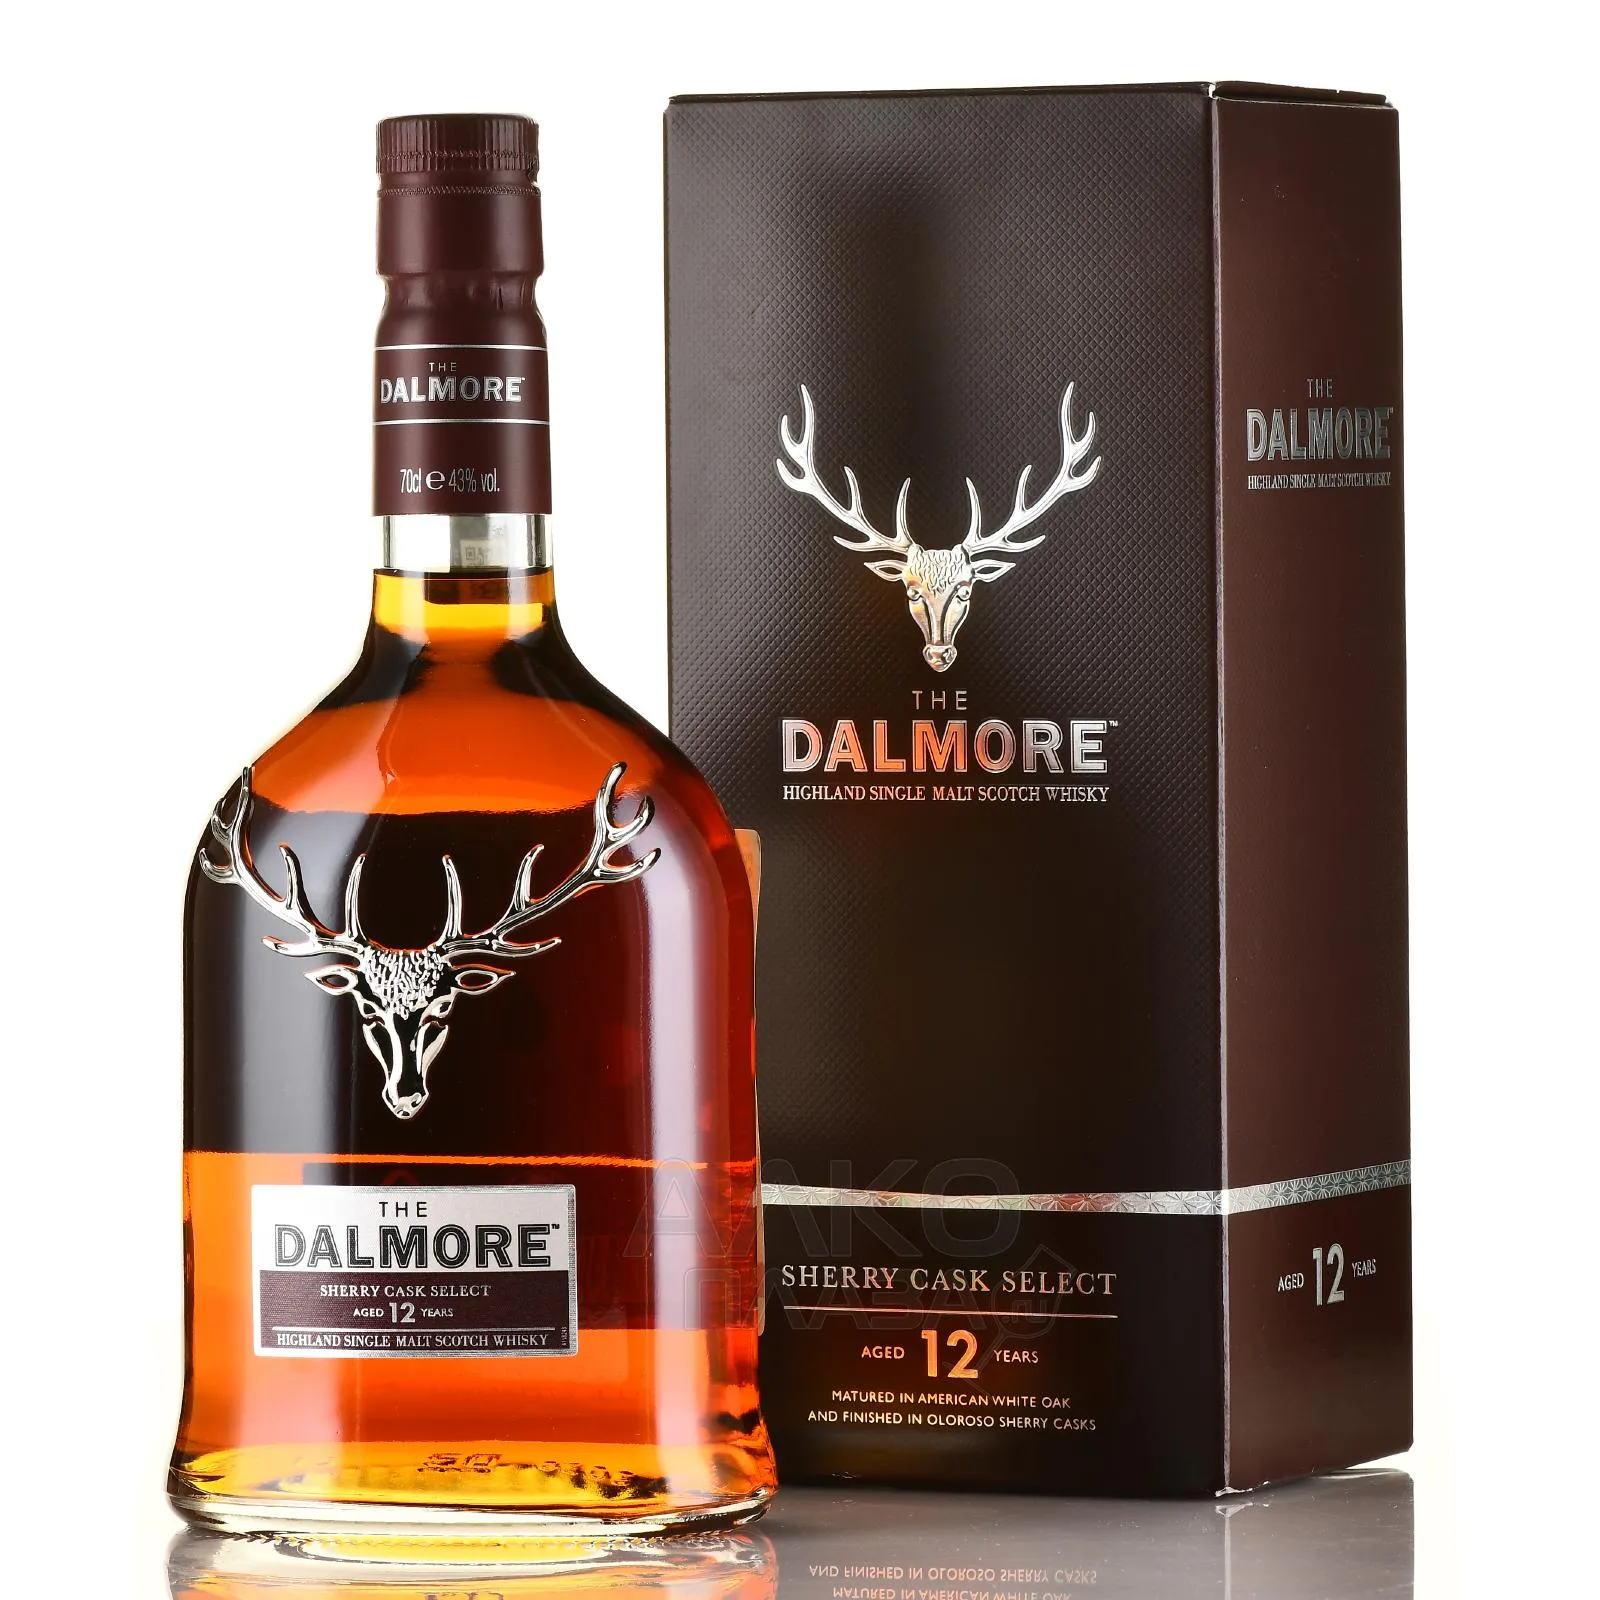 DALMORE 12 YEARS SHERRY CASK SELECT